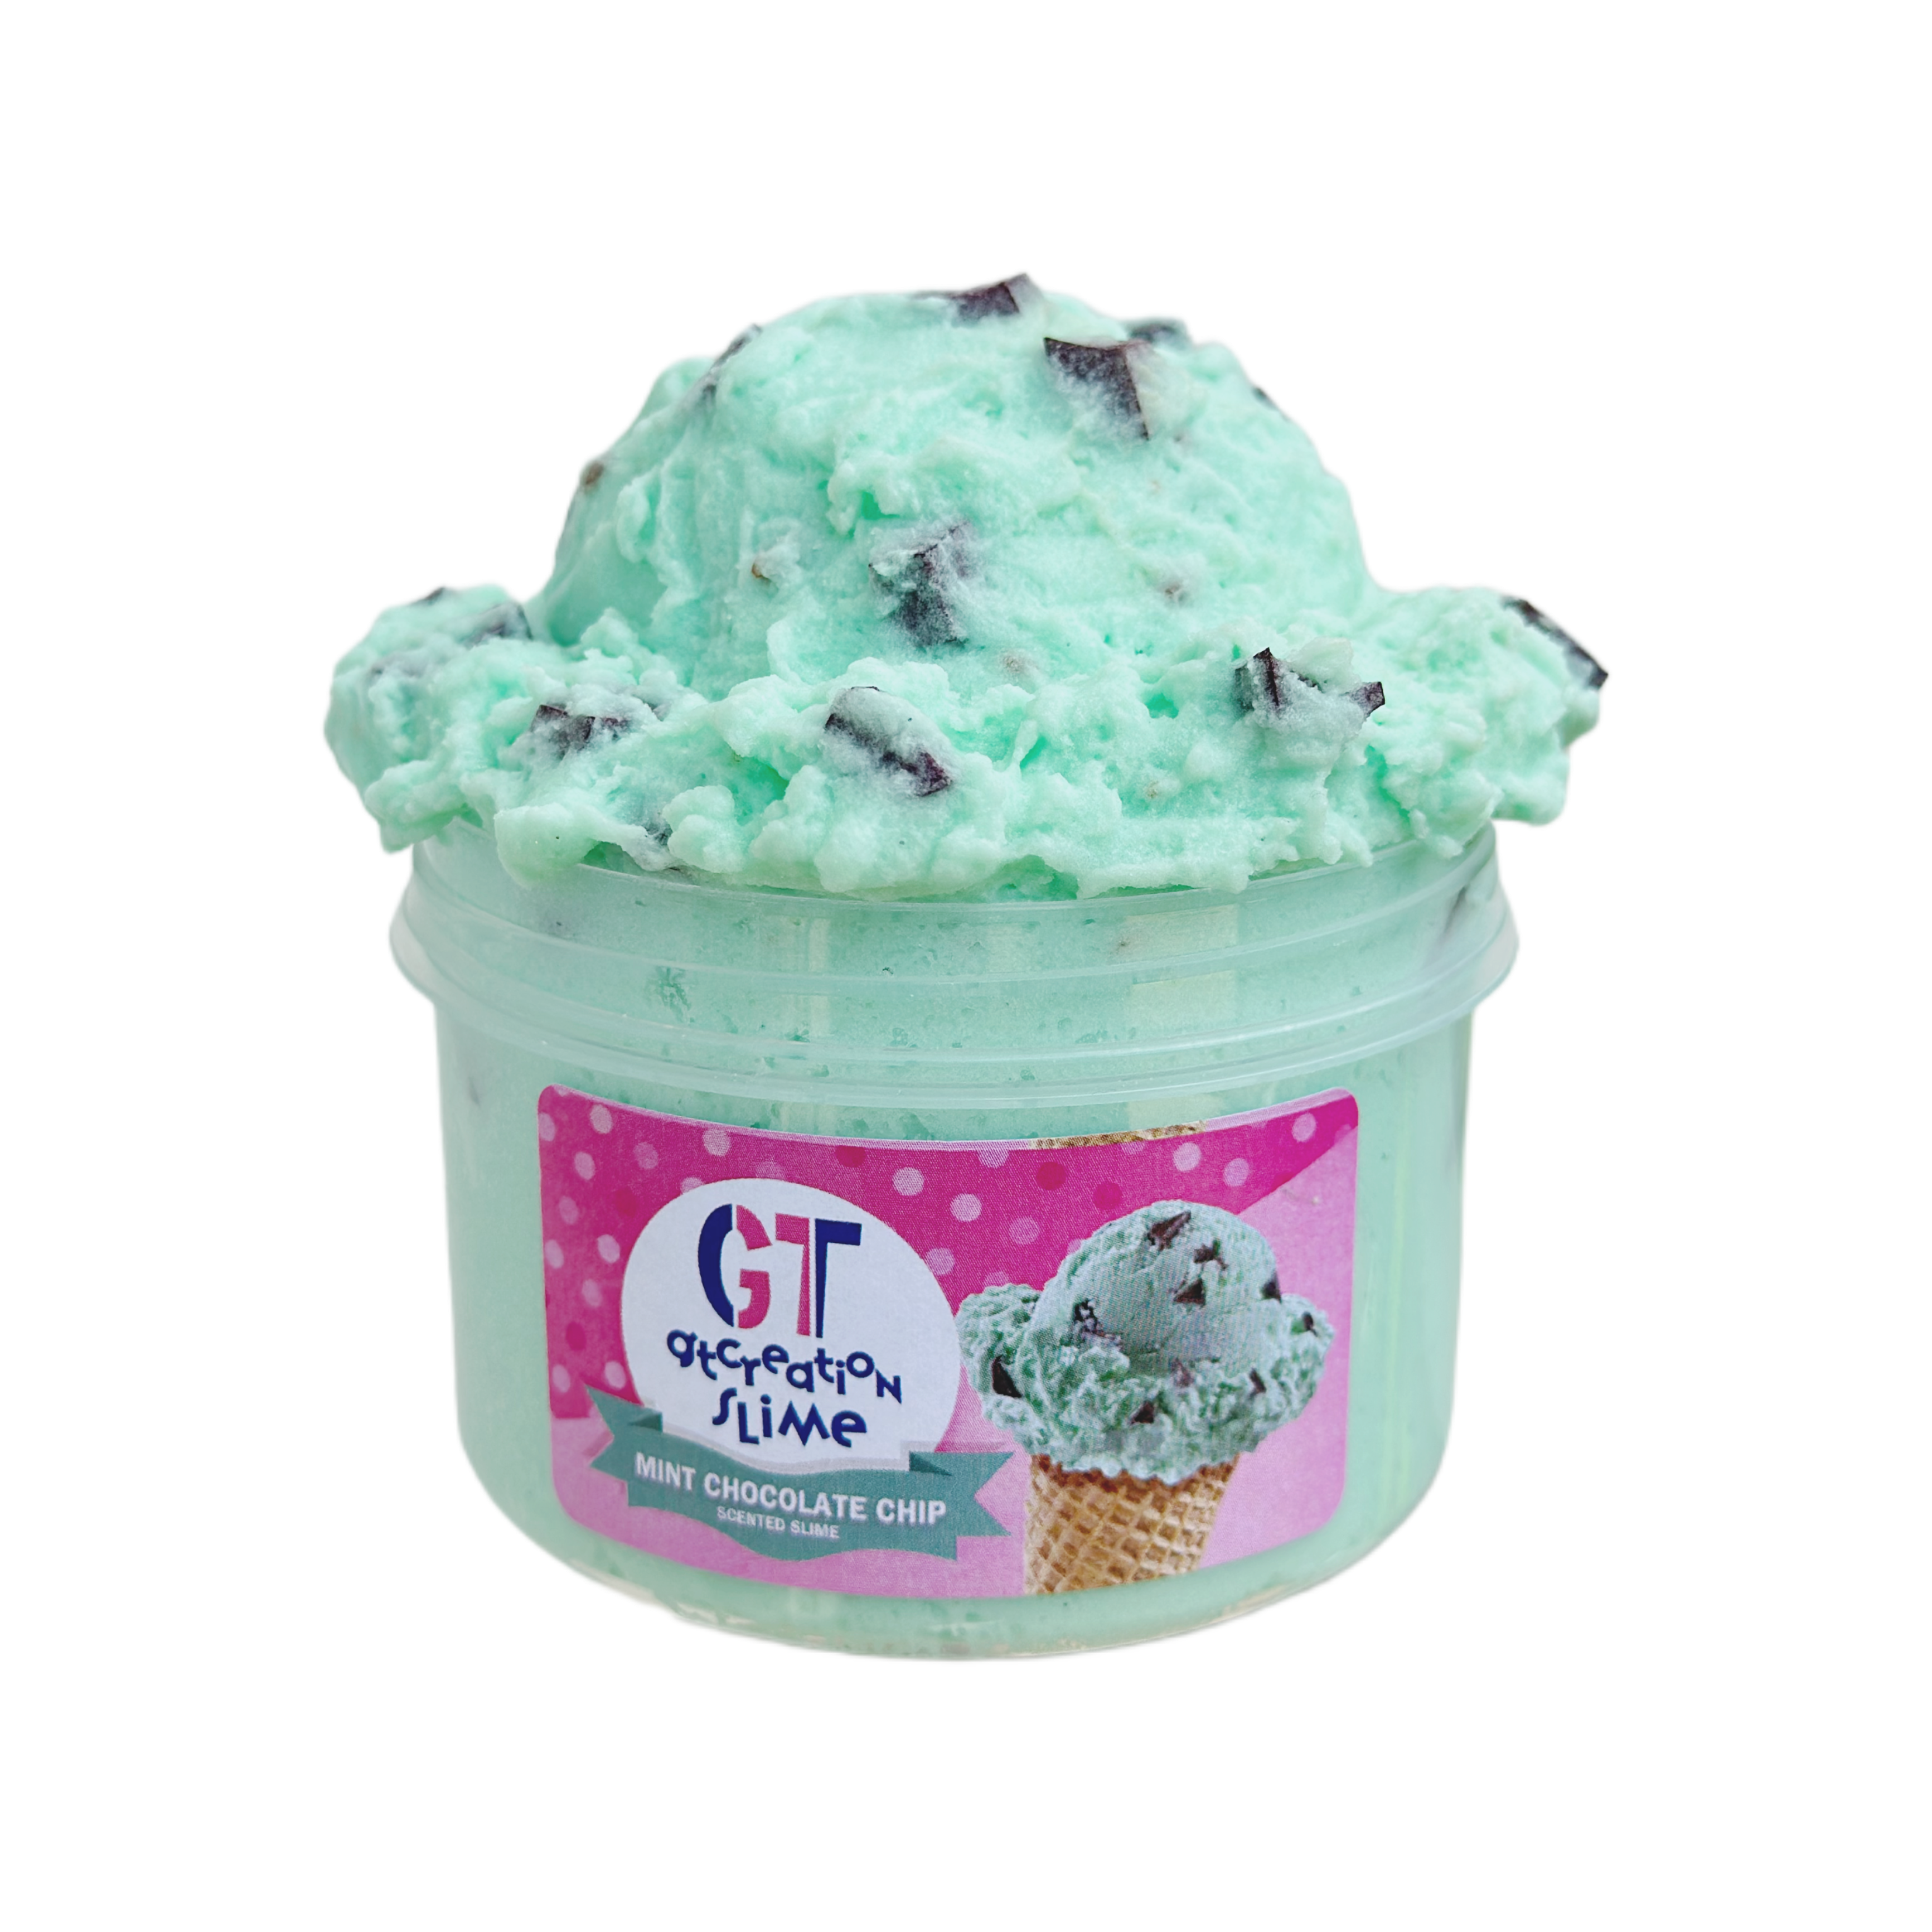 Buy gt ice cream Online in Mauritius at Low Prices at desertcart